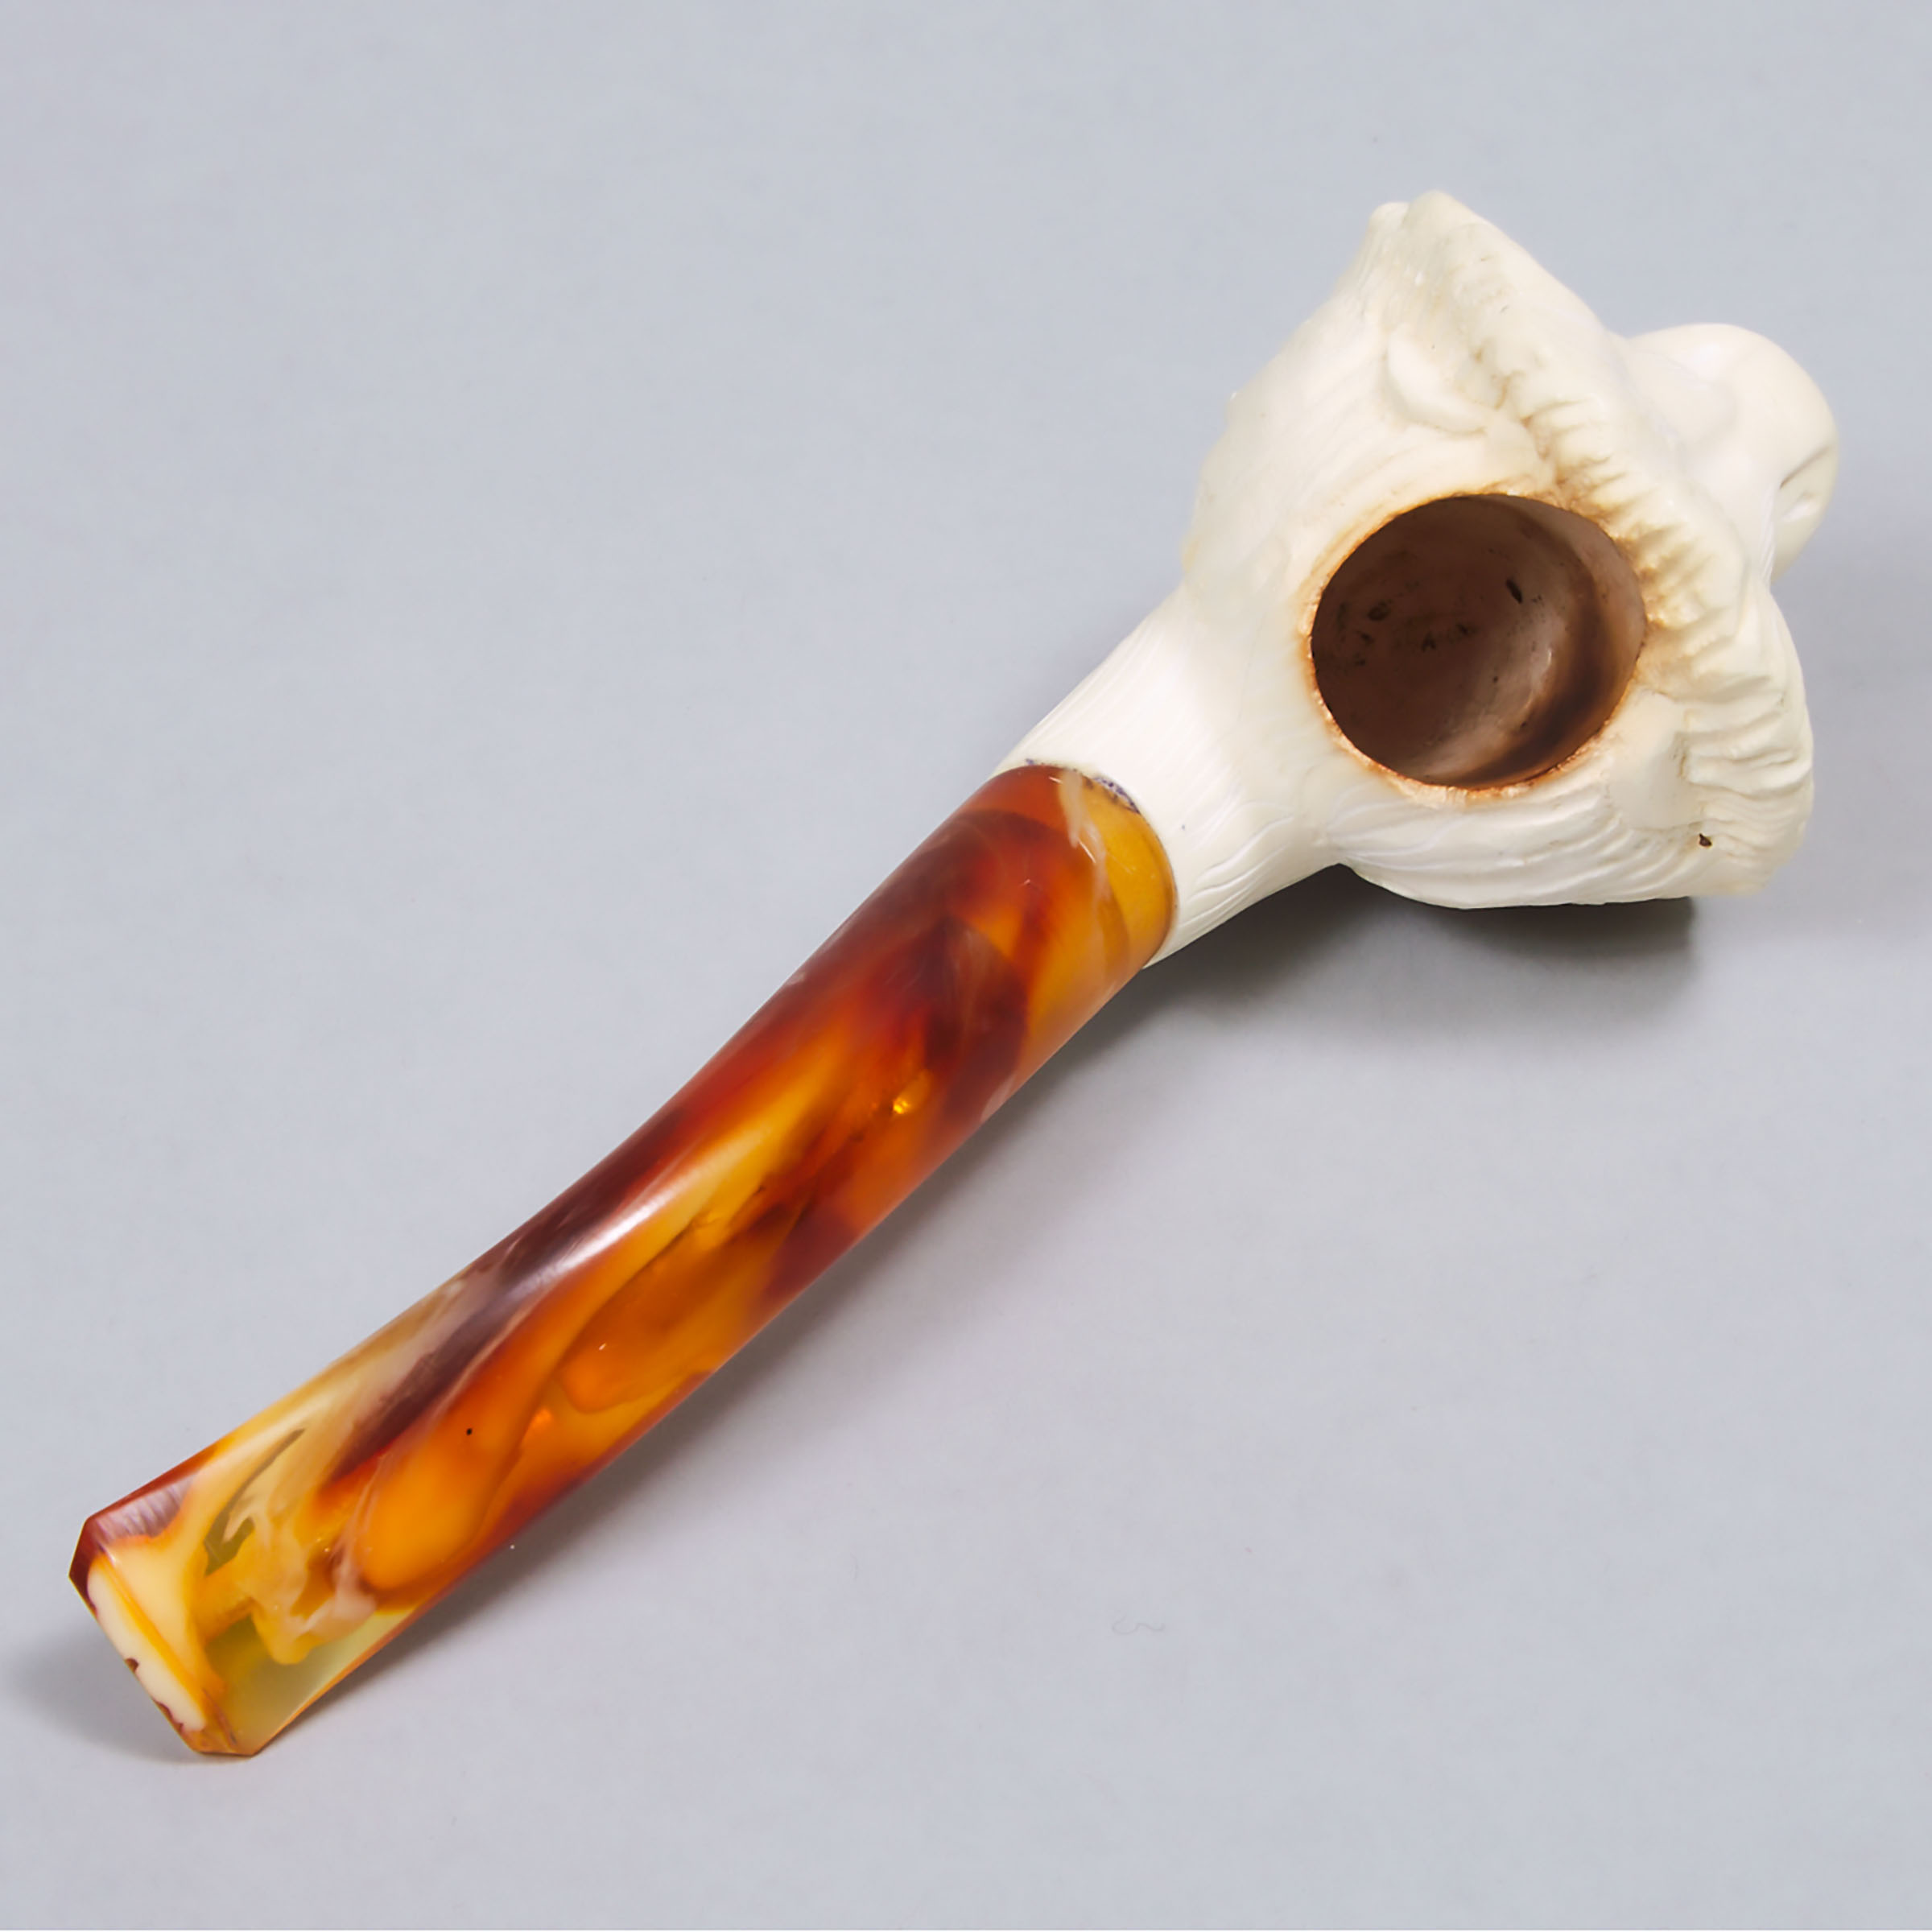 Carved Meerschaum And Amber Pipe, formed as a lion's head; in a fitted case